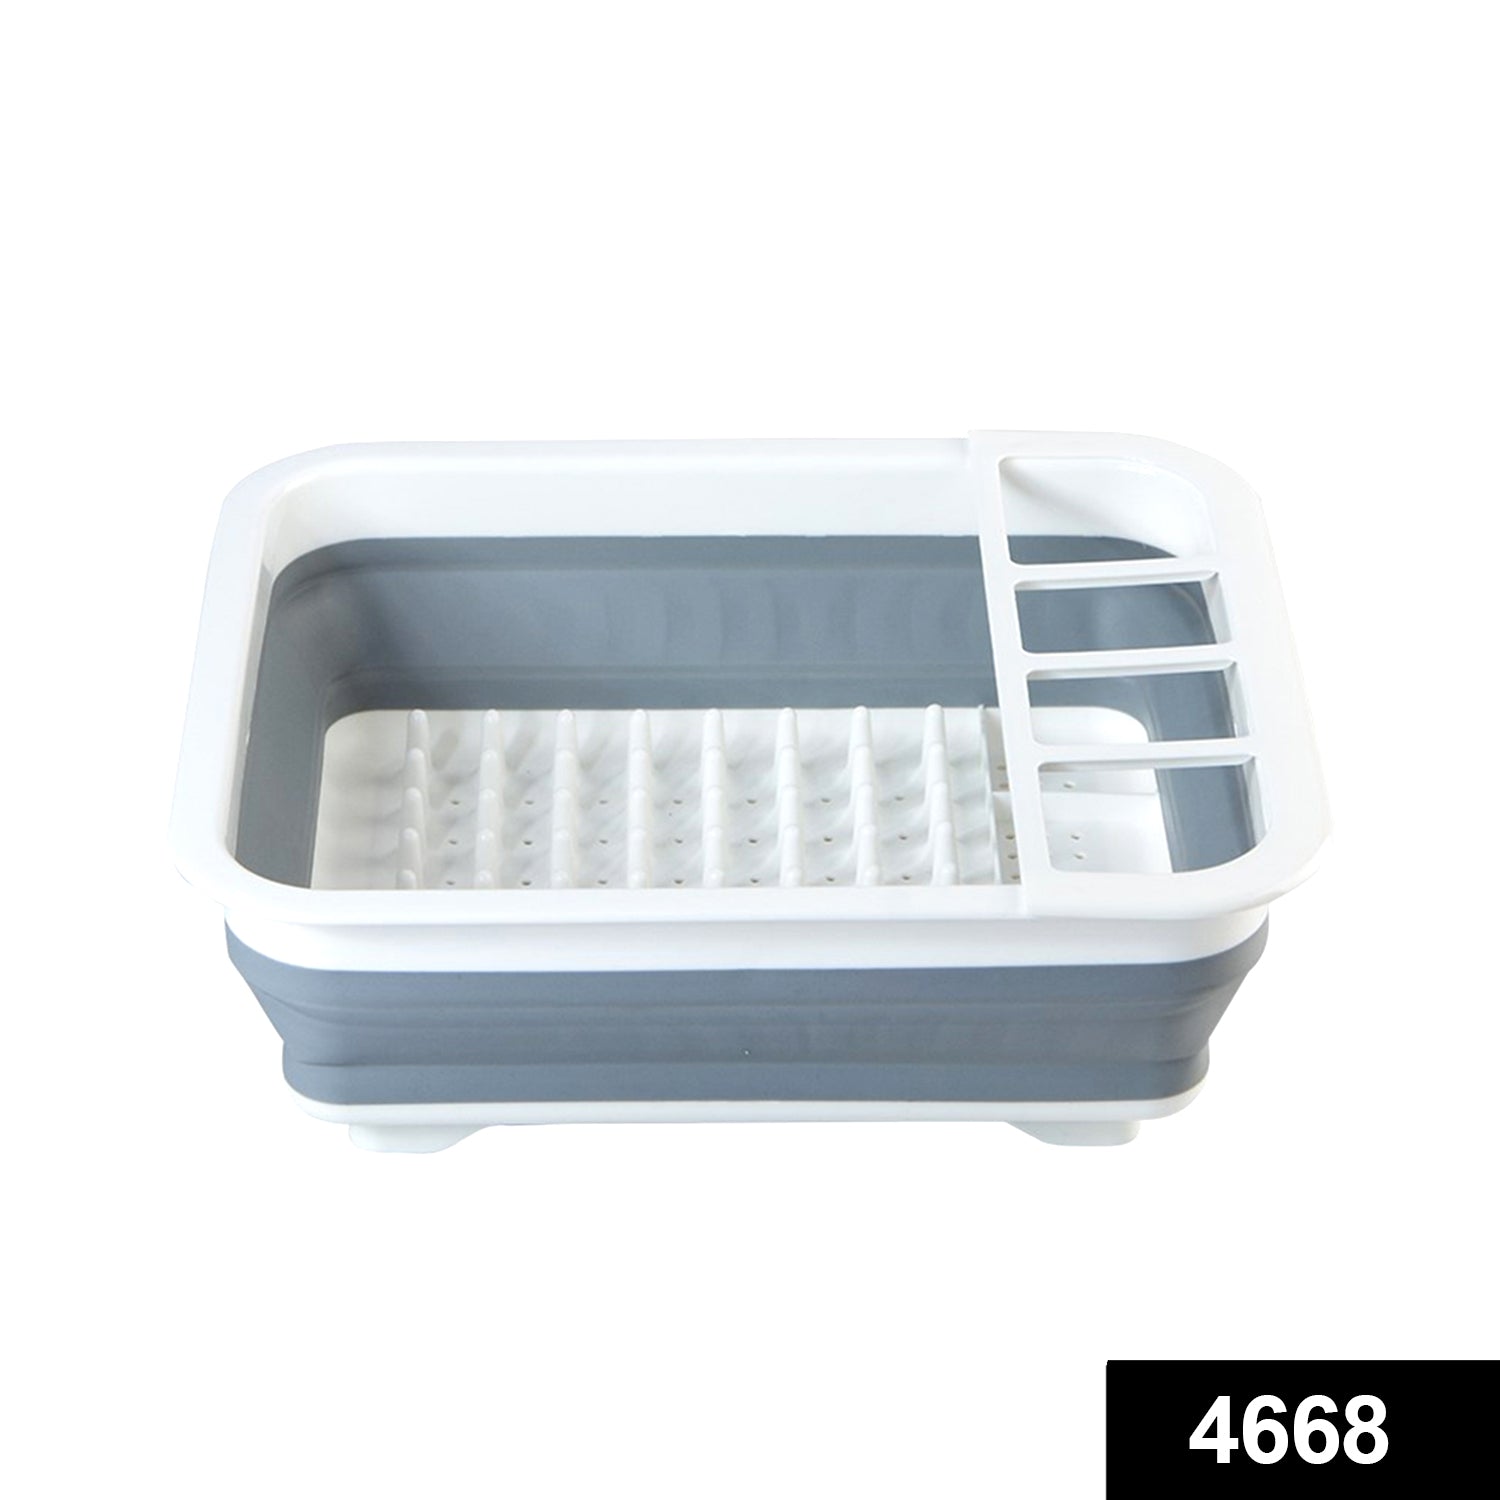 4668 Silicone Plastic Folding Collapsible Durable Kitchen Sink Dish Rack freeshipping - DeoDap